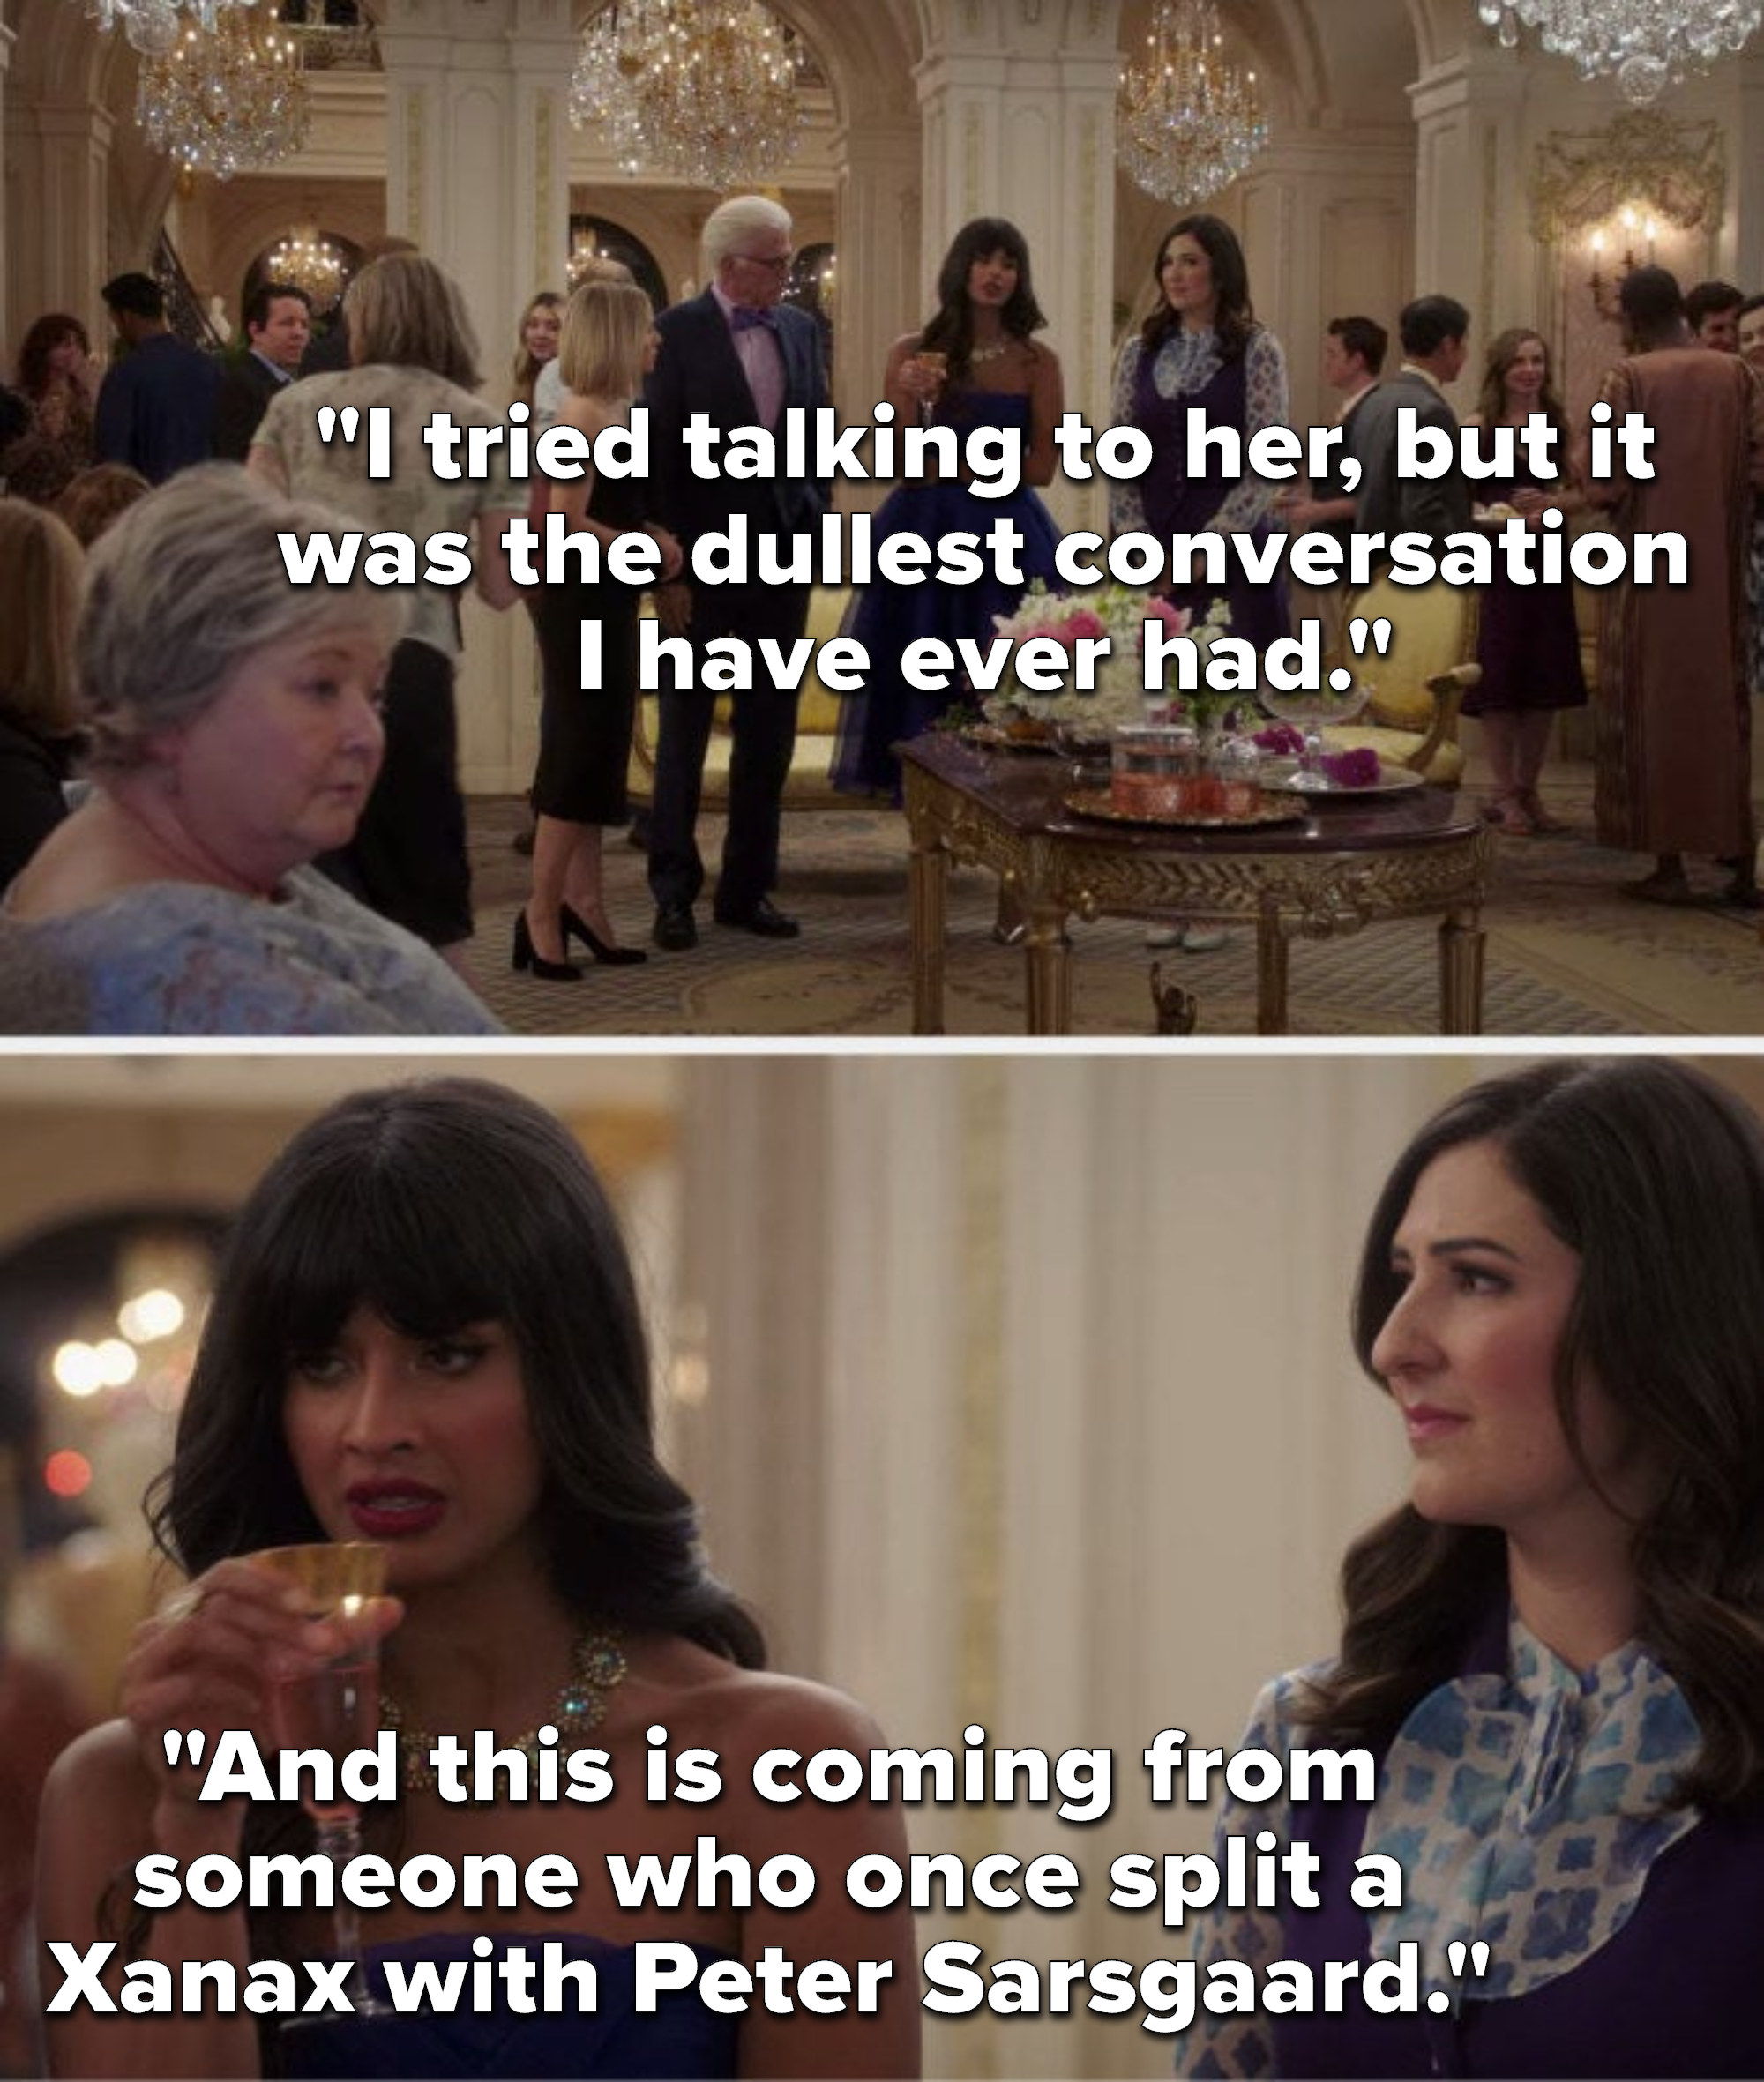 Tahani says, I tried talking to her, but it was the dullest conversation I have ever had, and this is coming from someone who once split a Xanax with Peter Sarsgaard&quot;